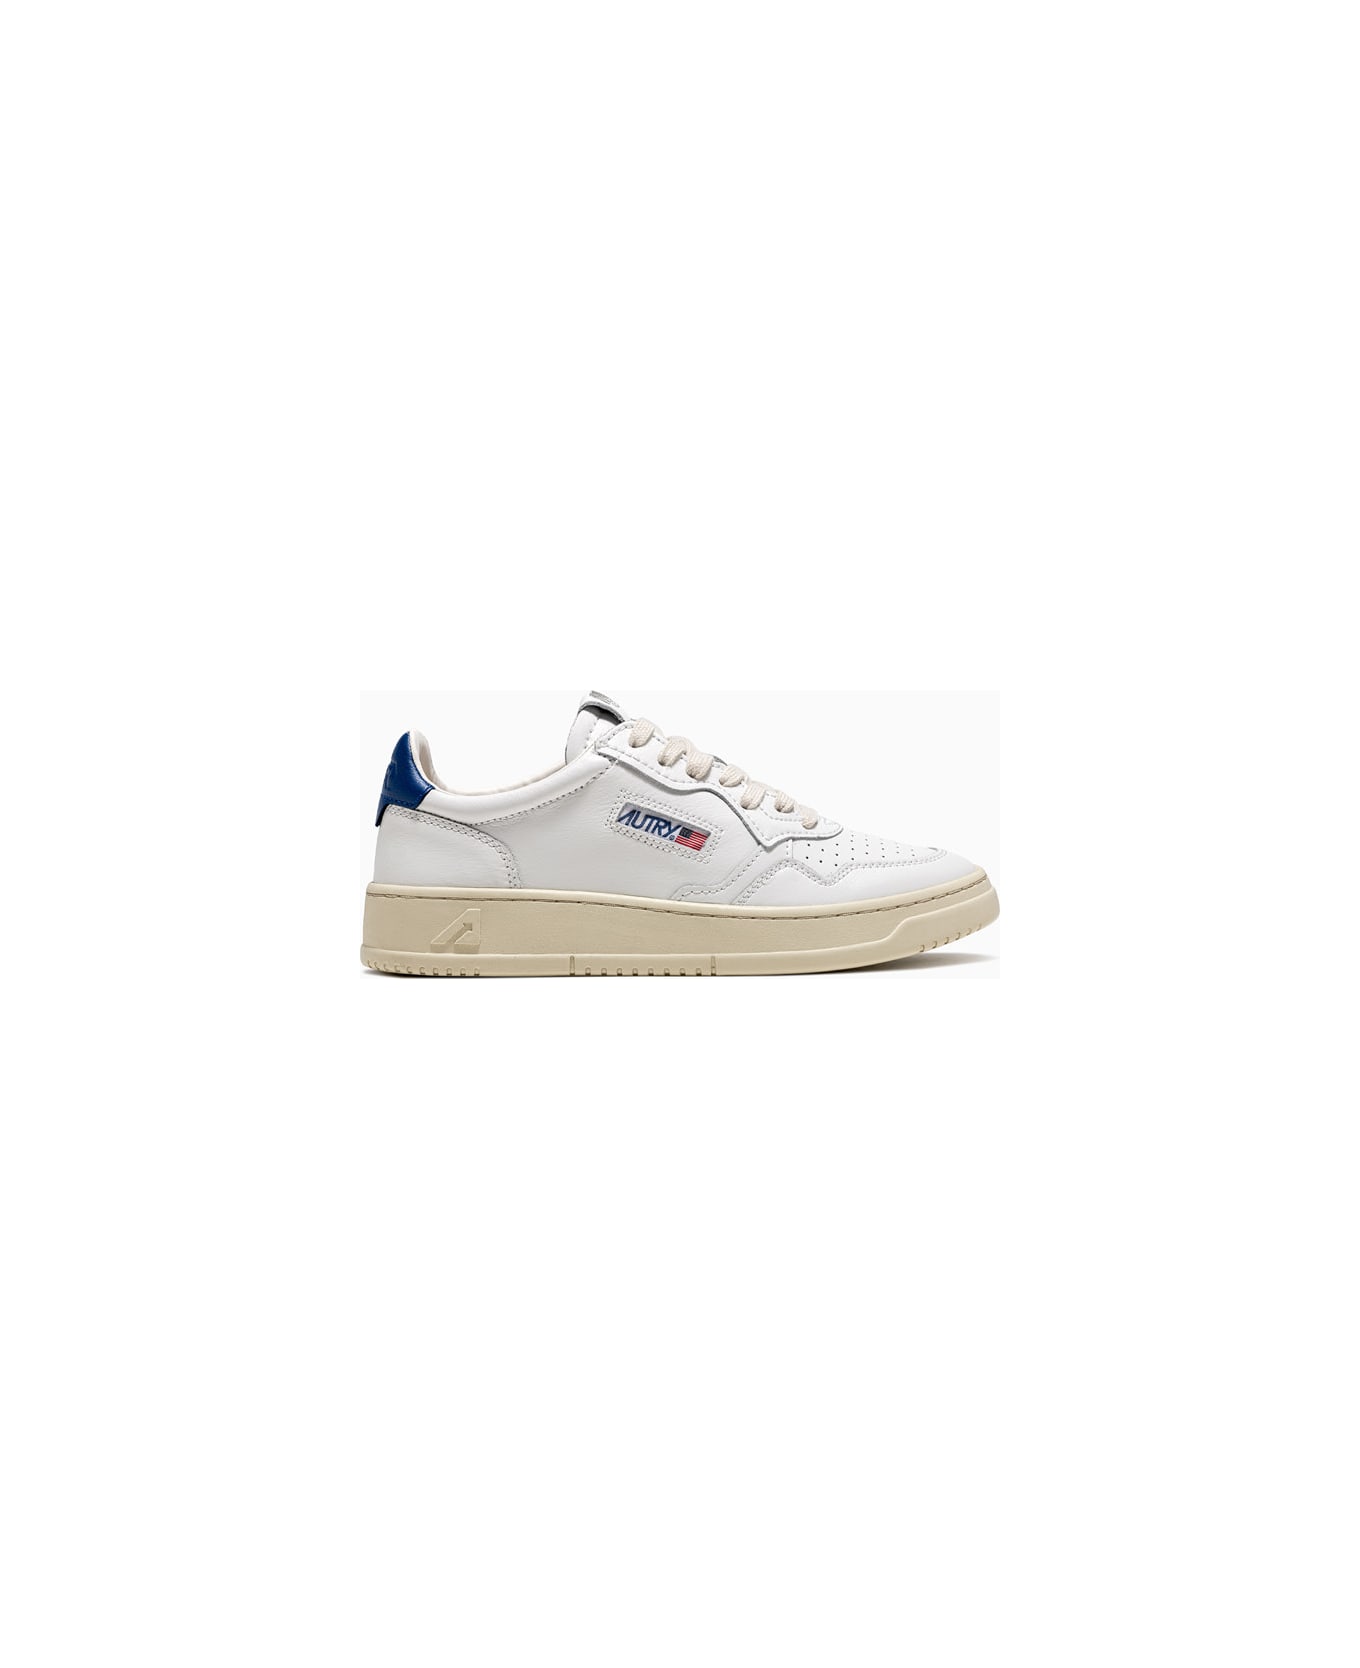 Autry Low Aulum Ll12 Sneakers - White